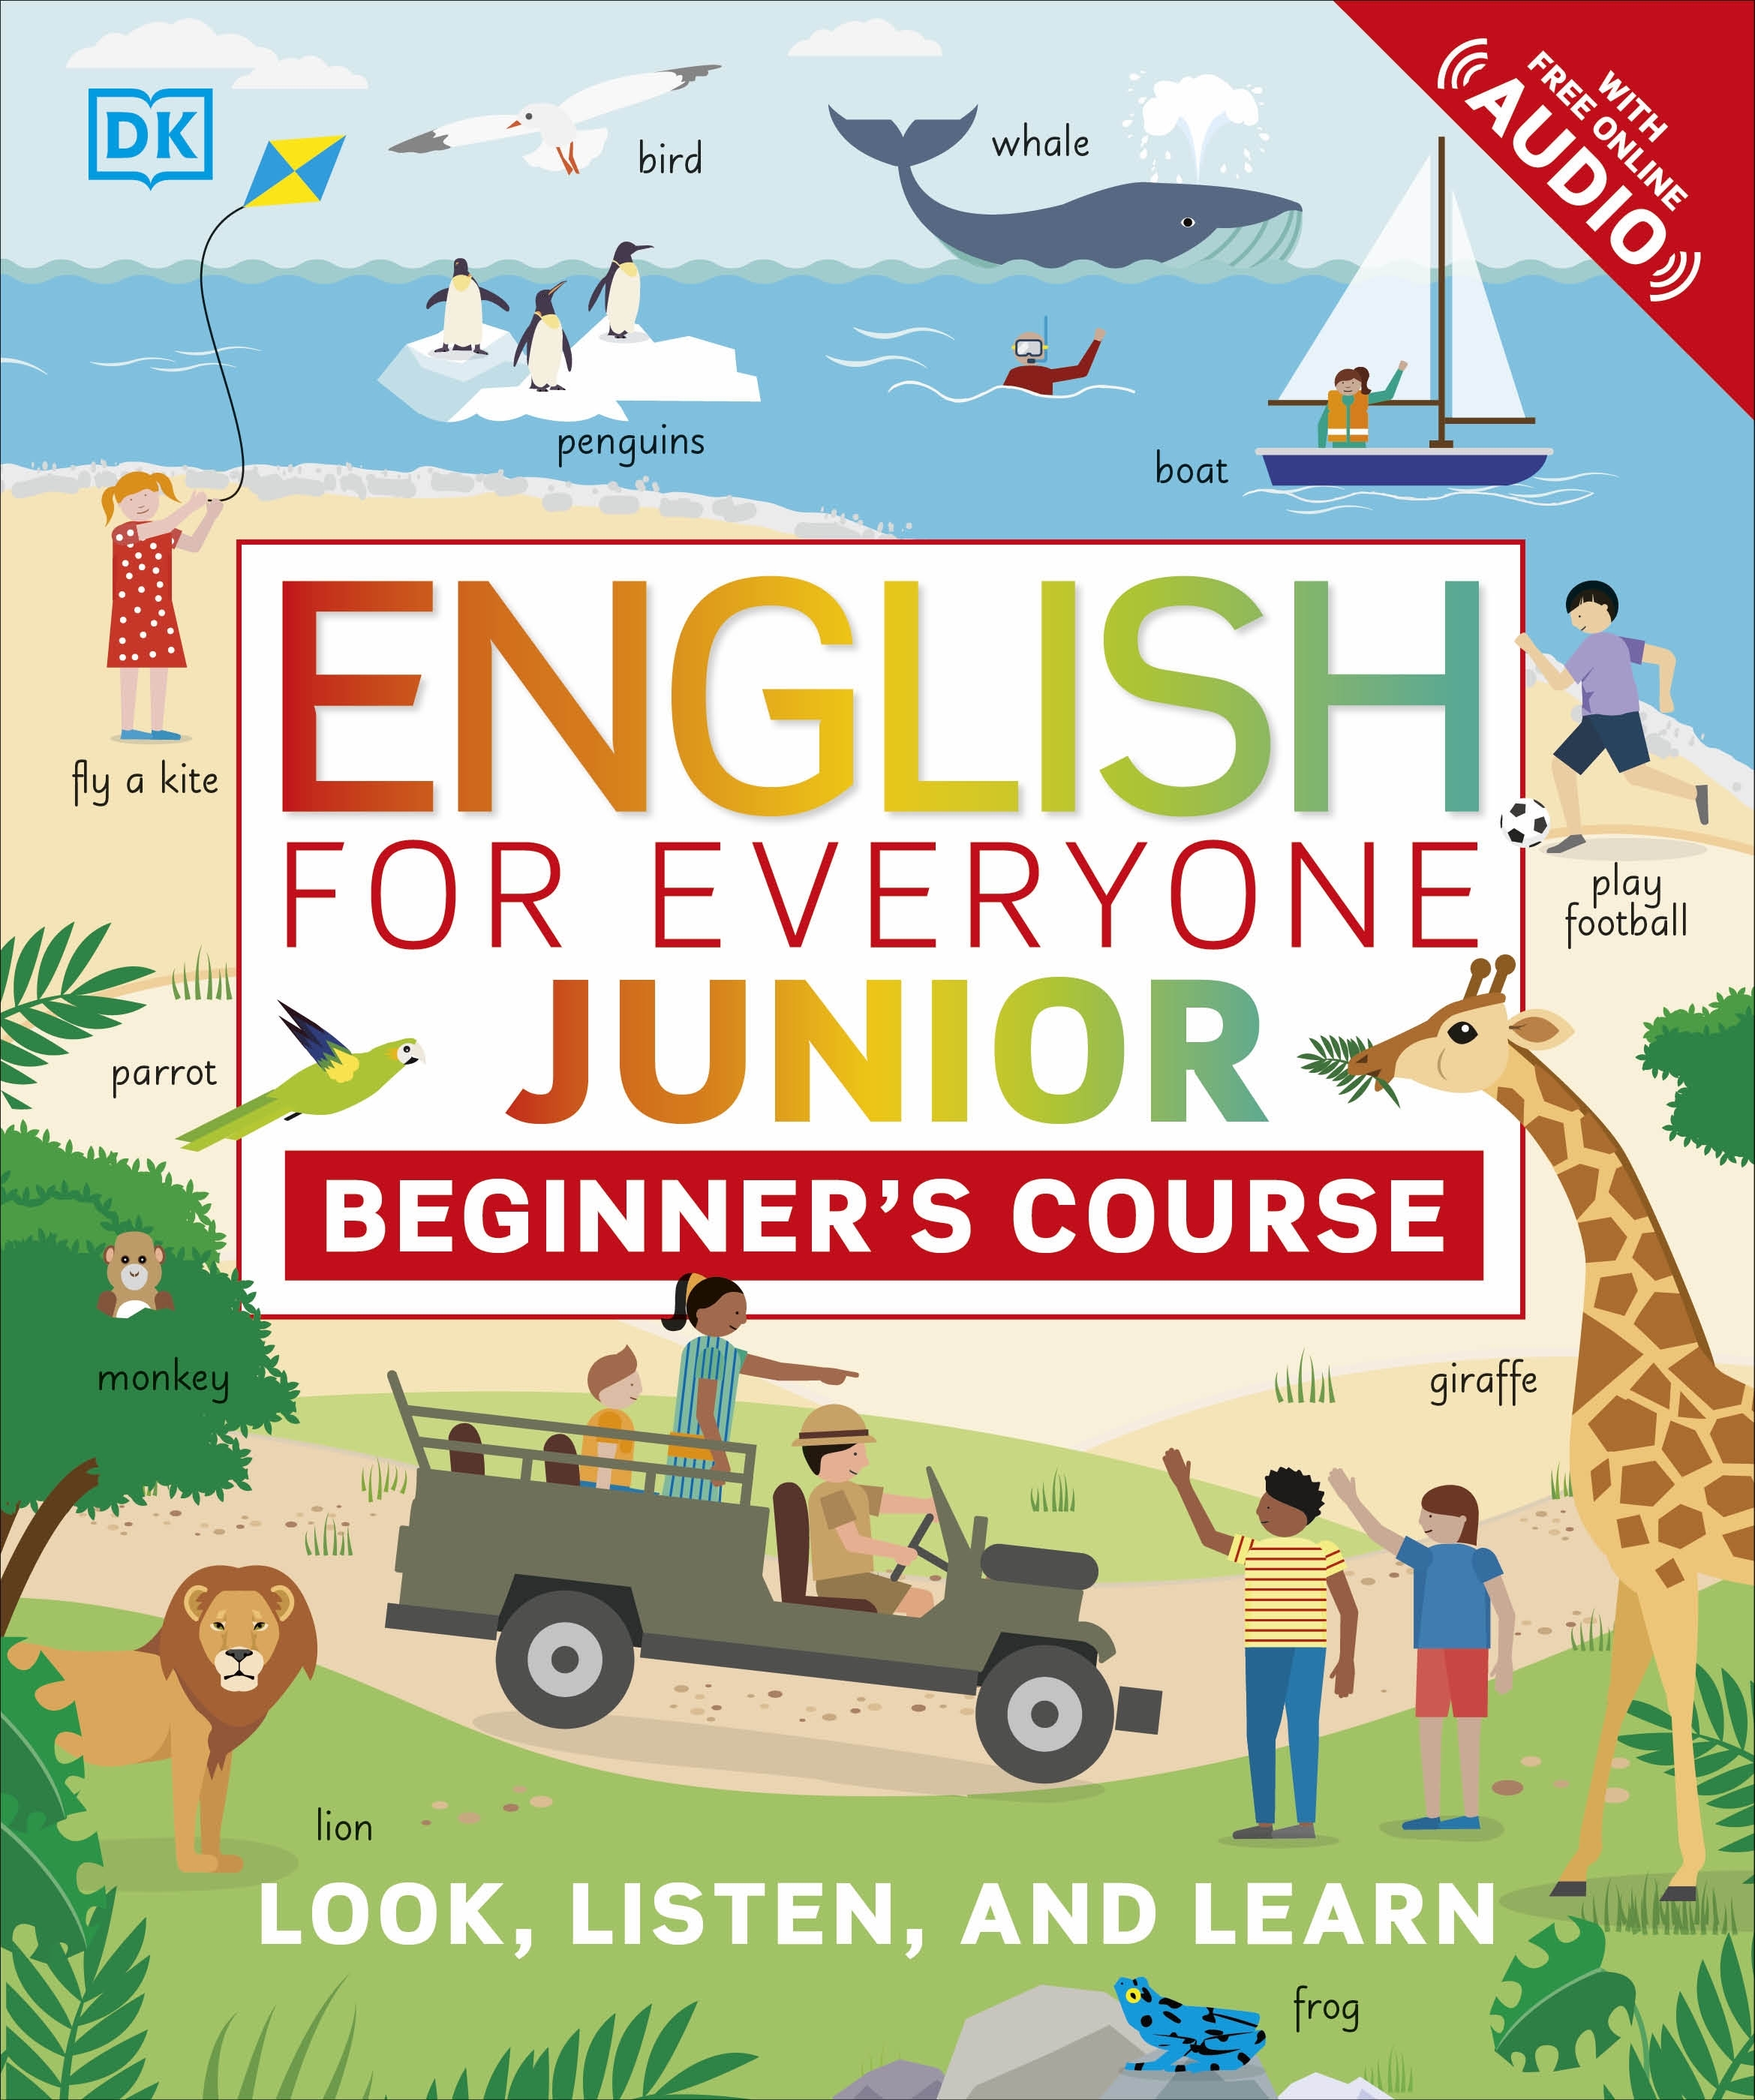 english-for-everyone-junior-beginner-s-course-by-dk-penguin-books-new